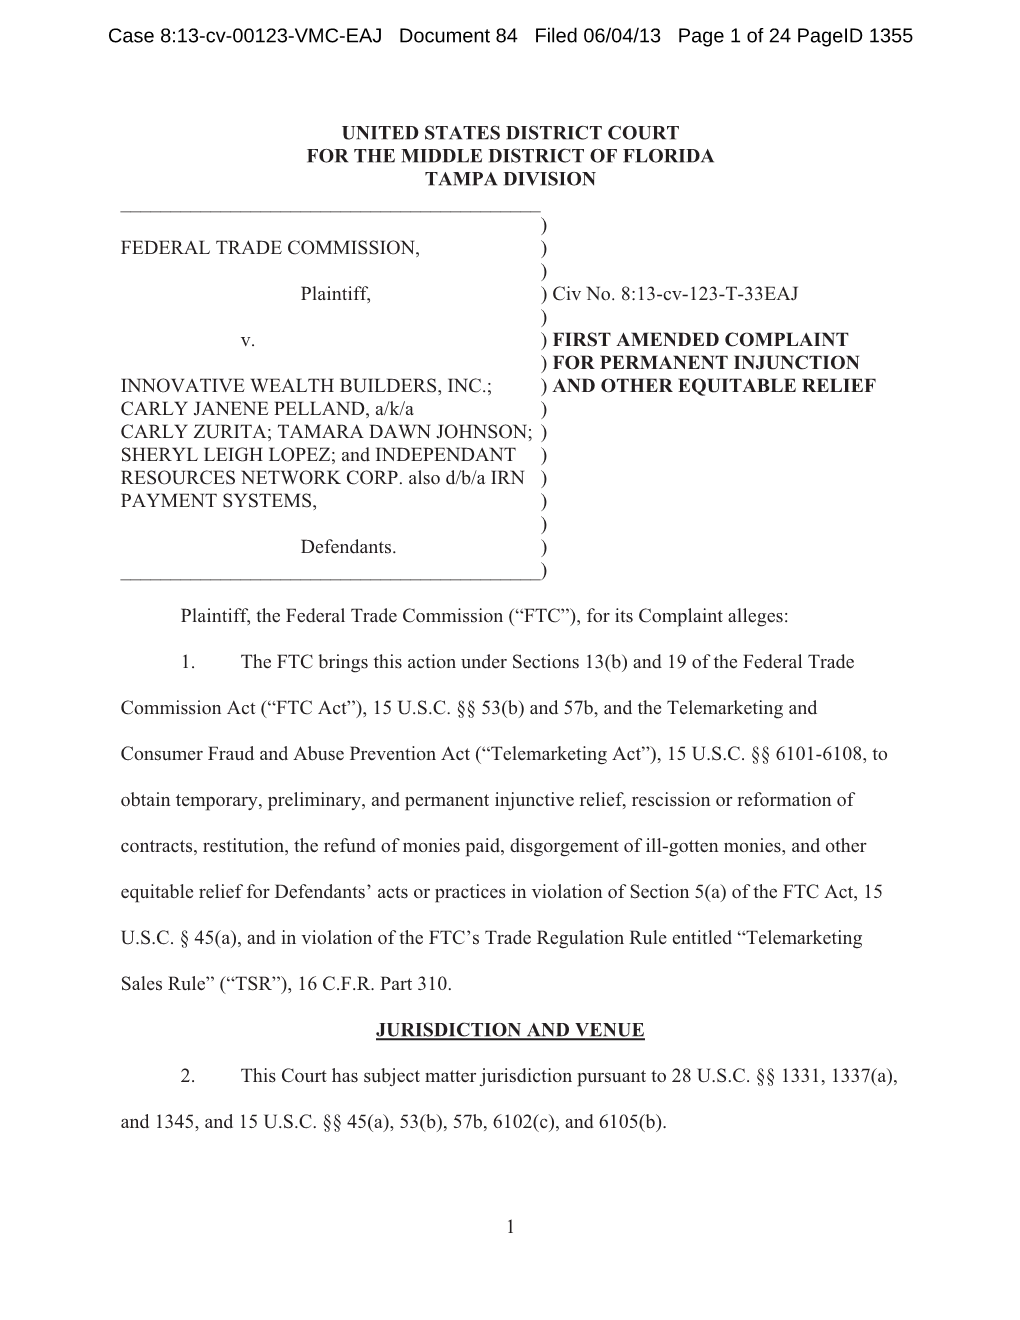 First Amended Complaint for Permanent Injunction and Other